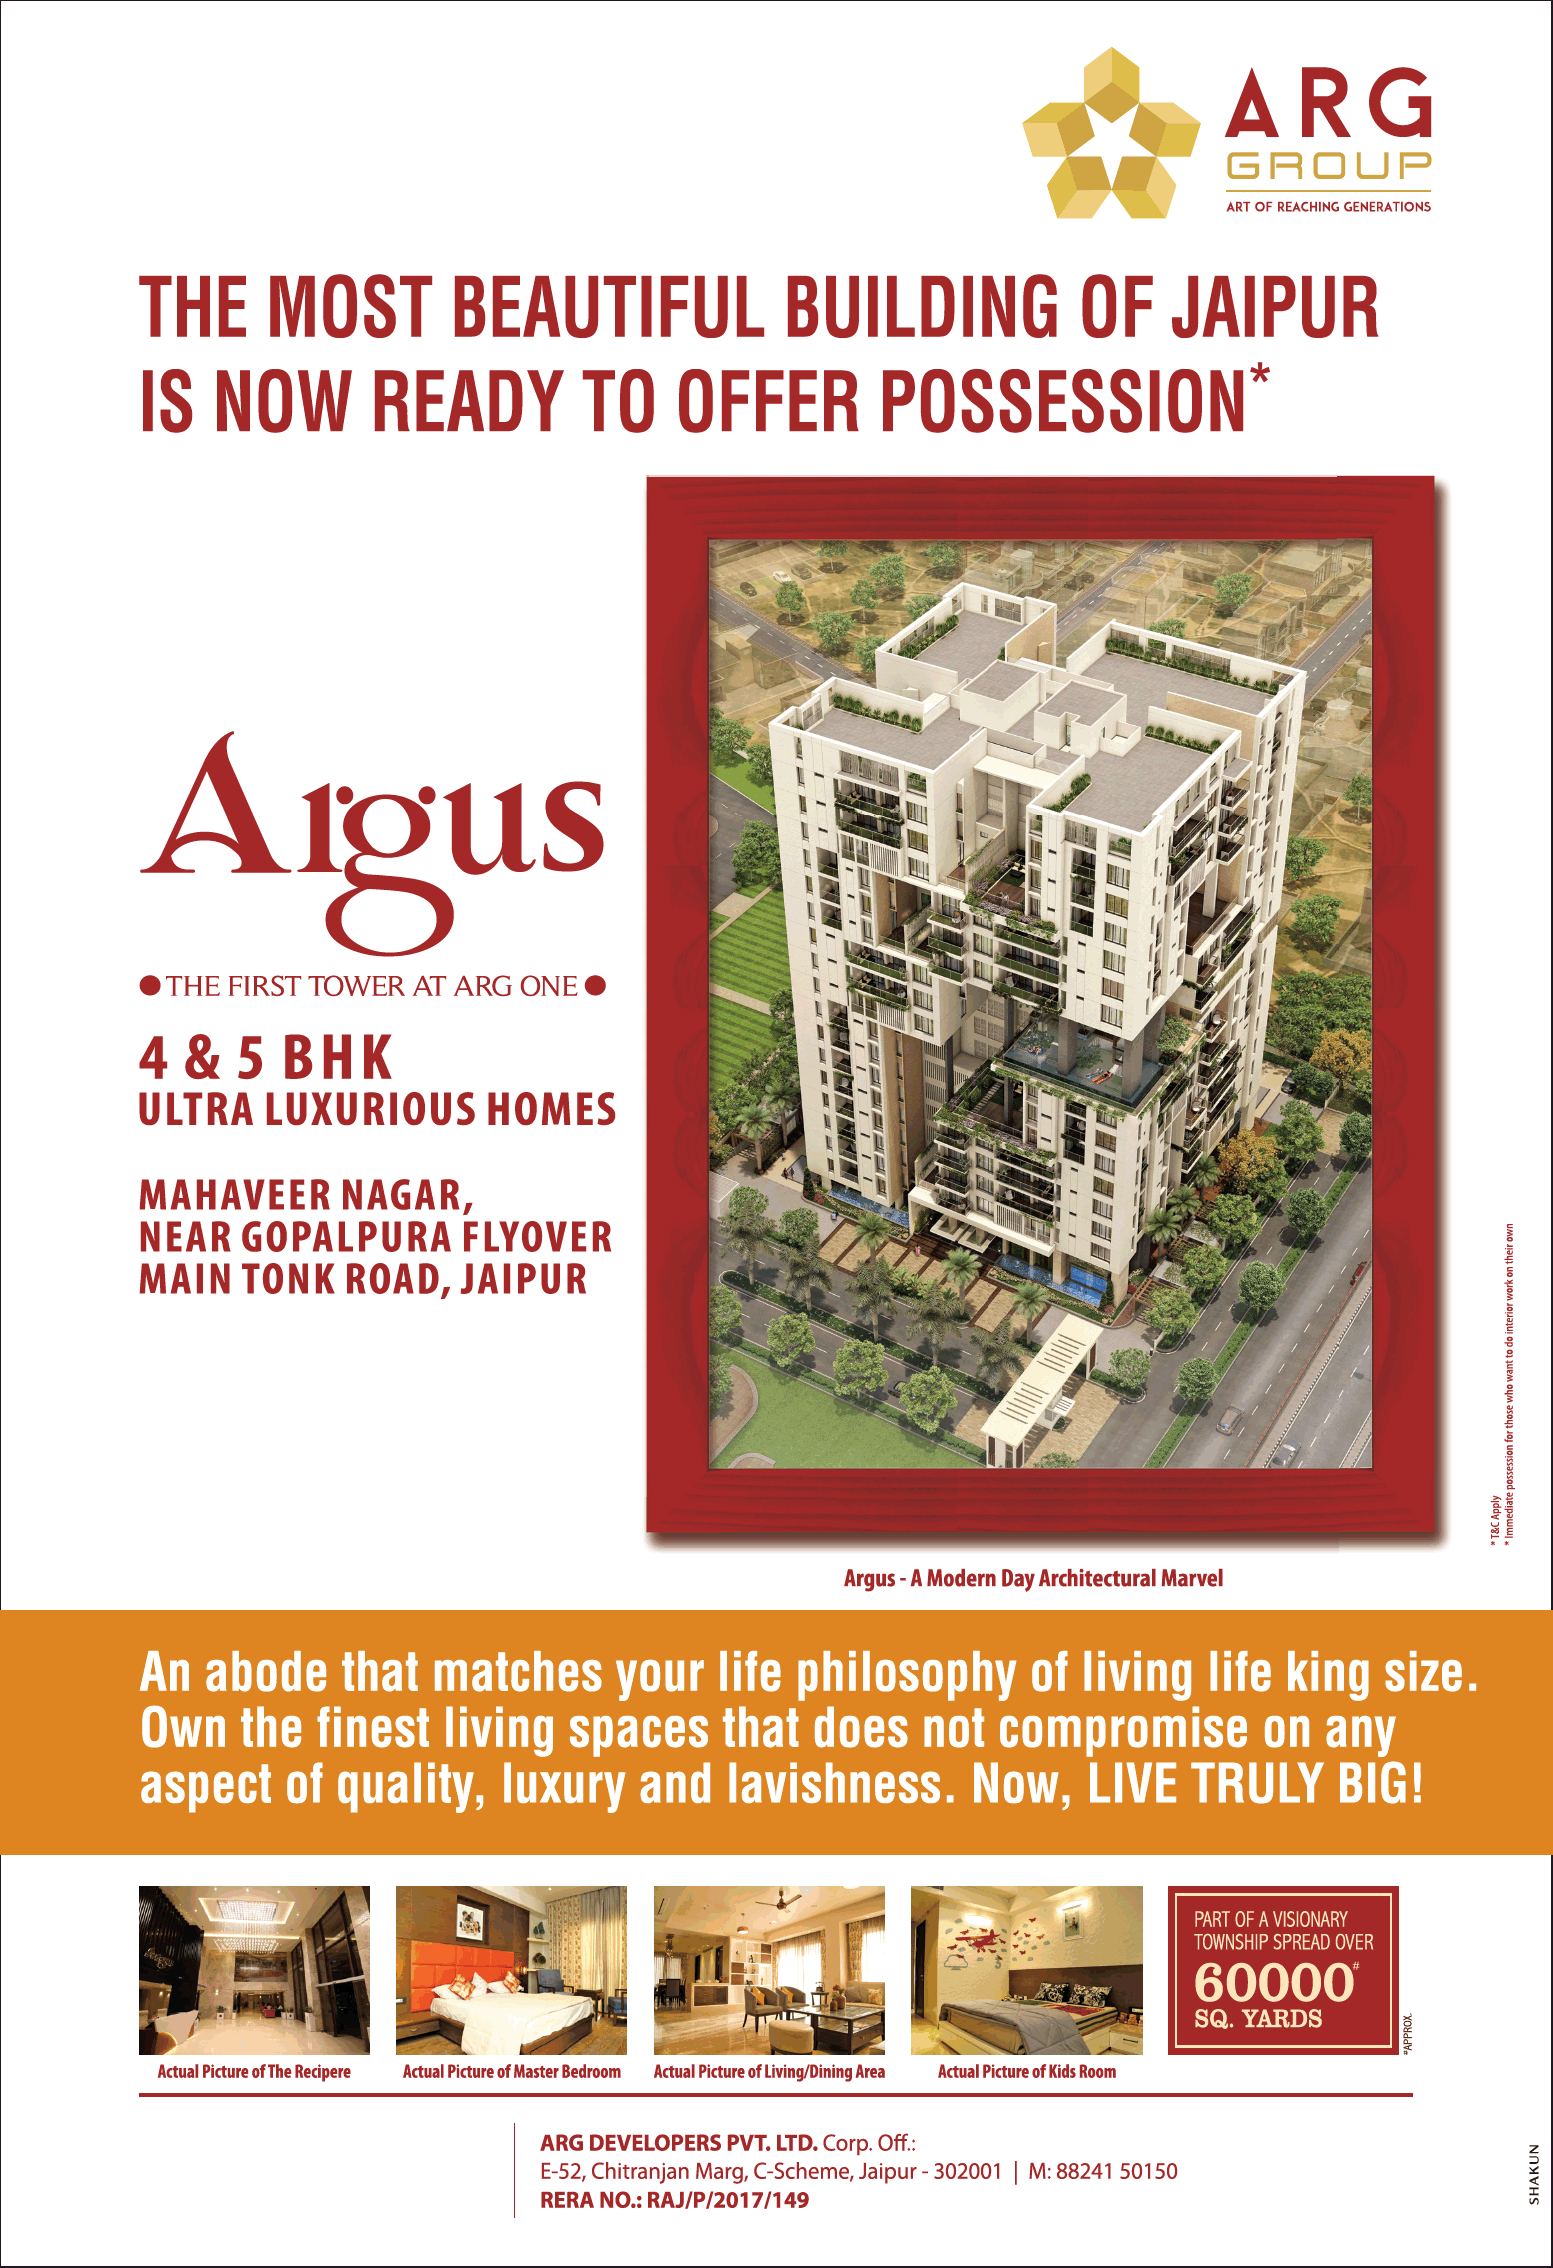 Book 4 and 5 BHK ultra luxurious homes at ARG One, Jaipur Update